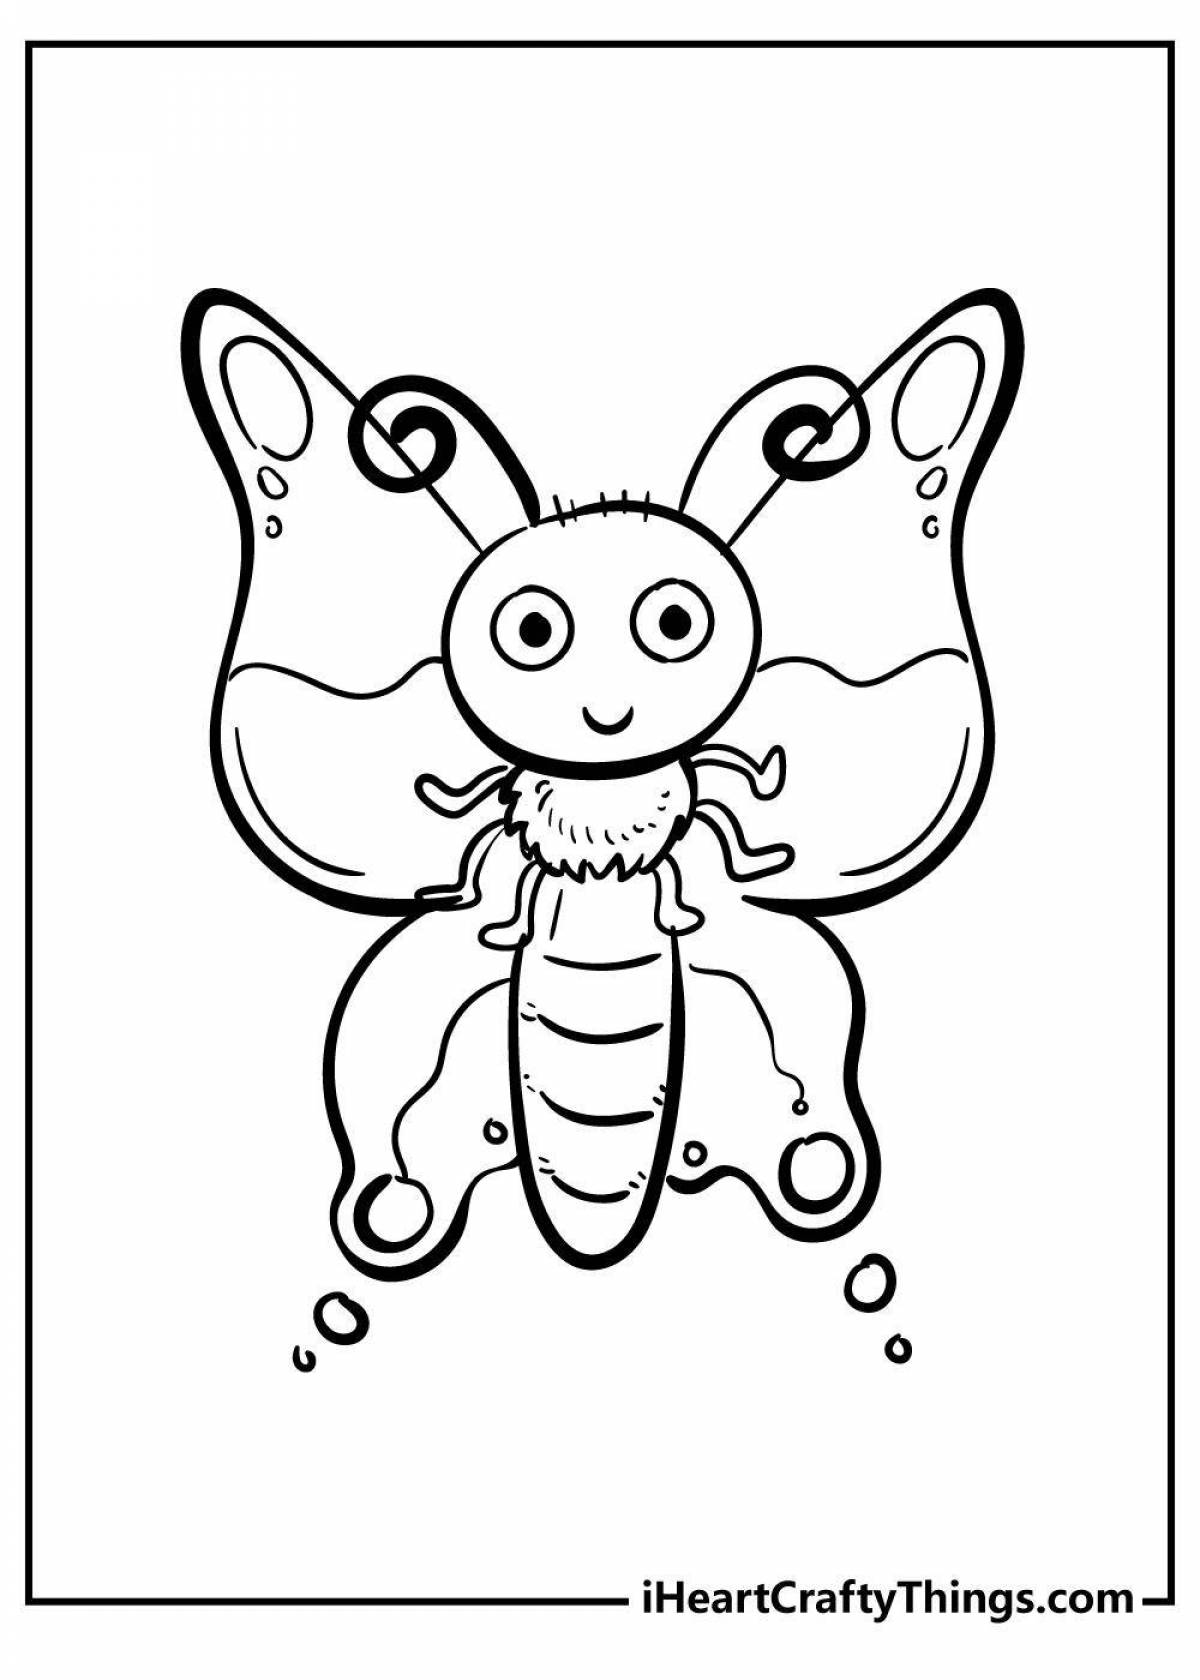 Extraordinary beetle coloring book for children 3-4 years old